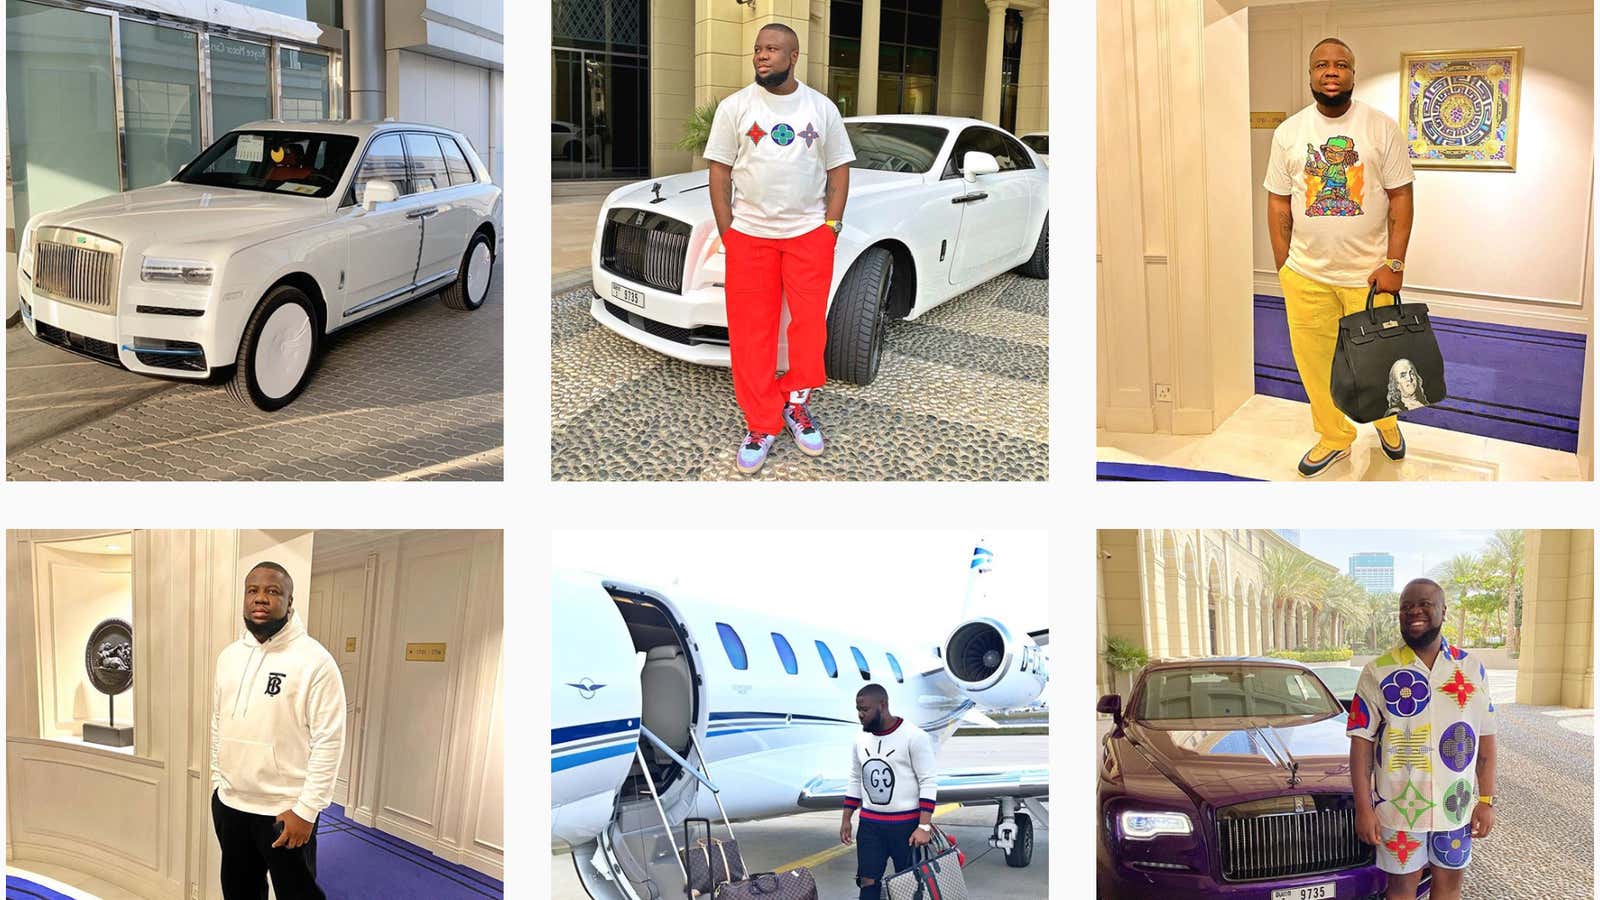 “Hushpuppi”: All about that Instagram life